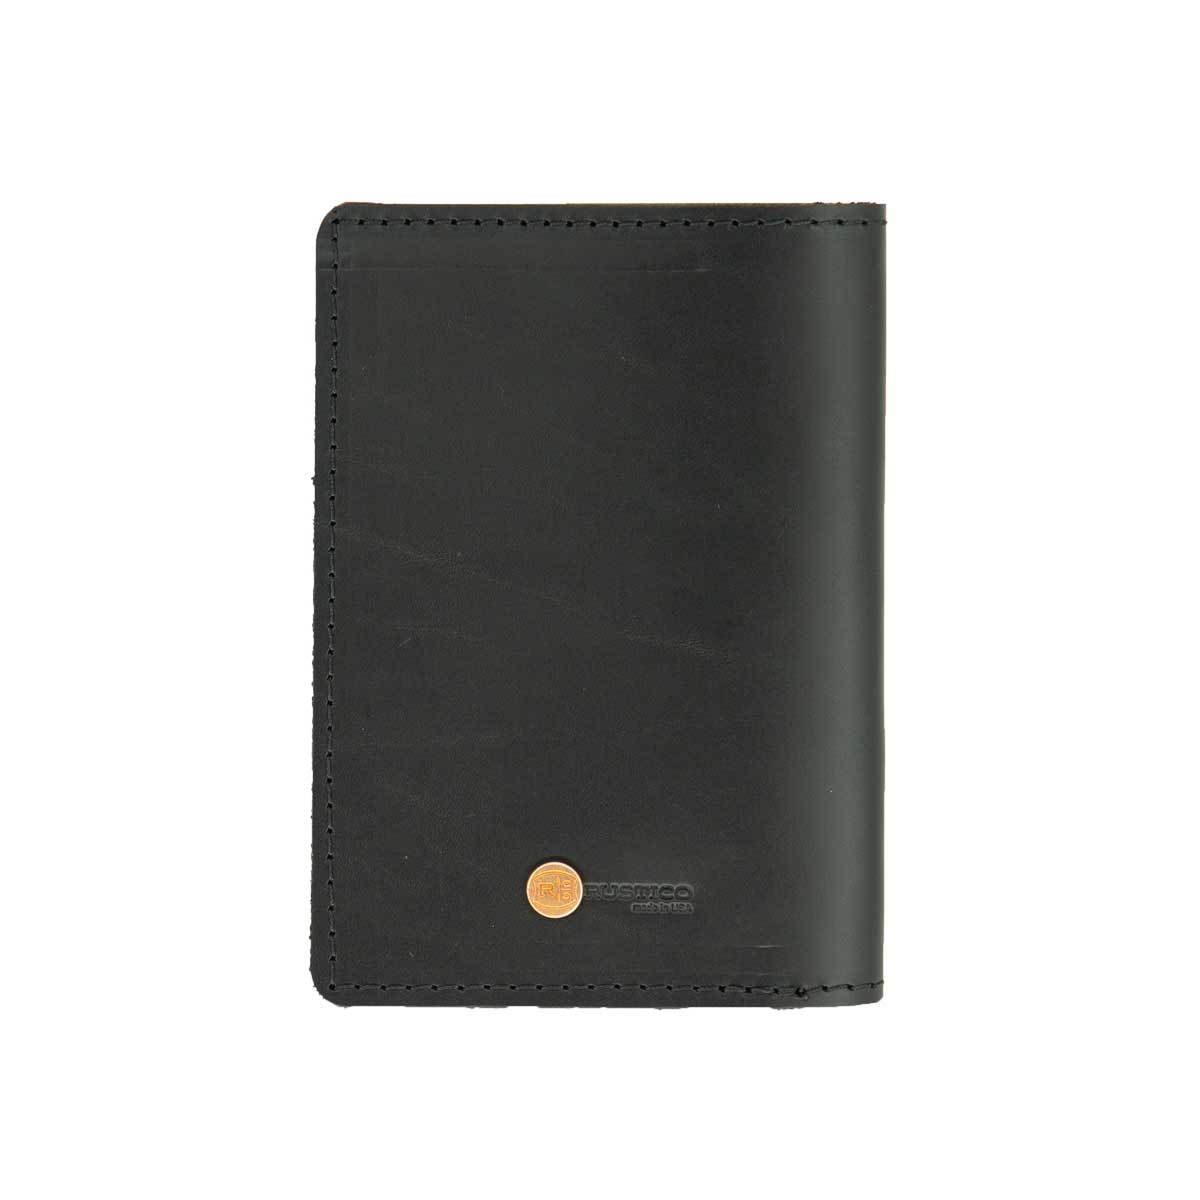 Leather Passport and Vax Card Holder